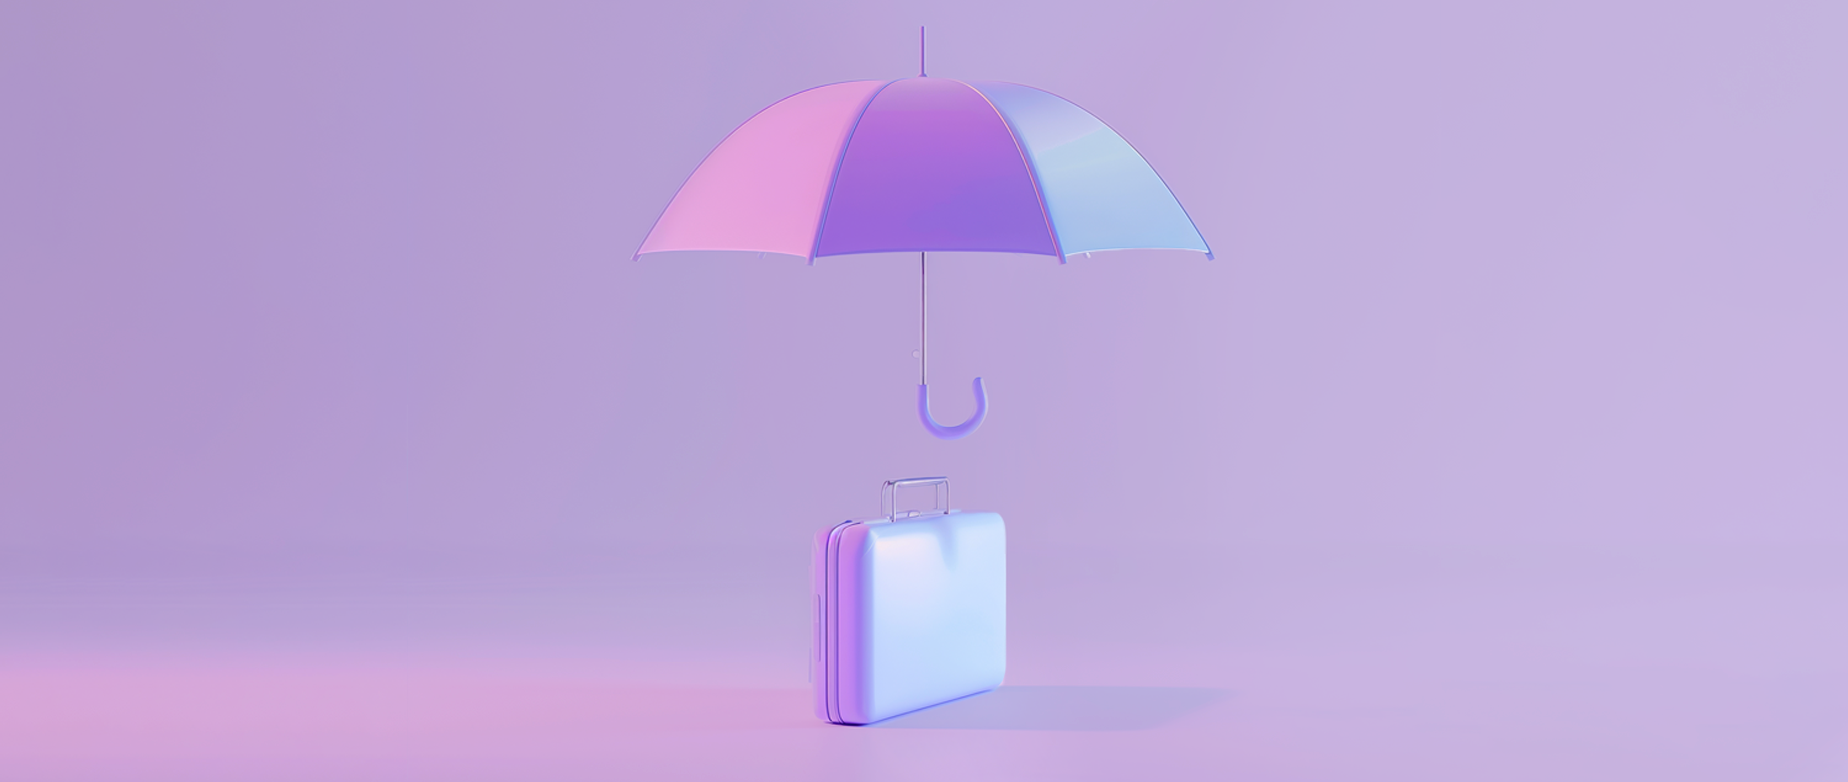 A briefcase with an open umbrella over it on a purple background.